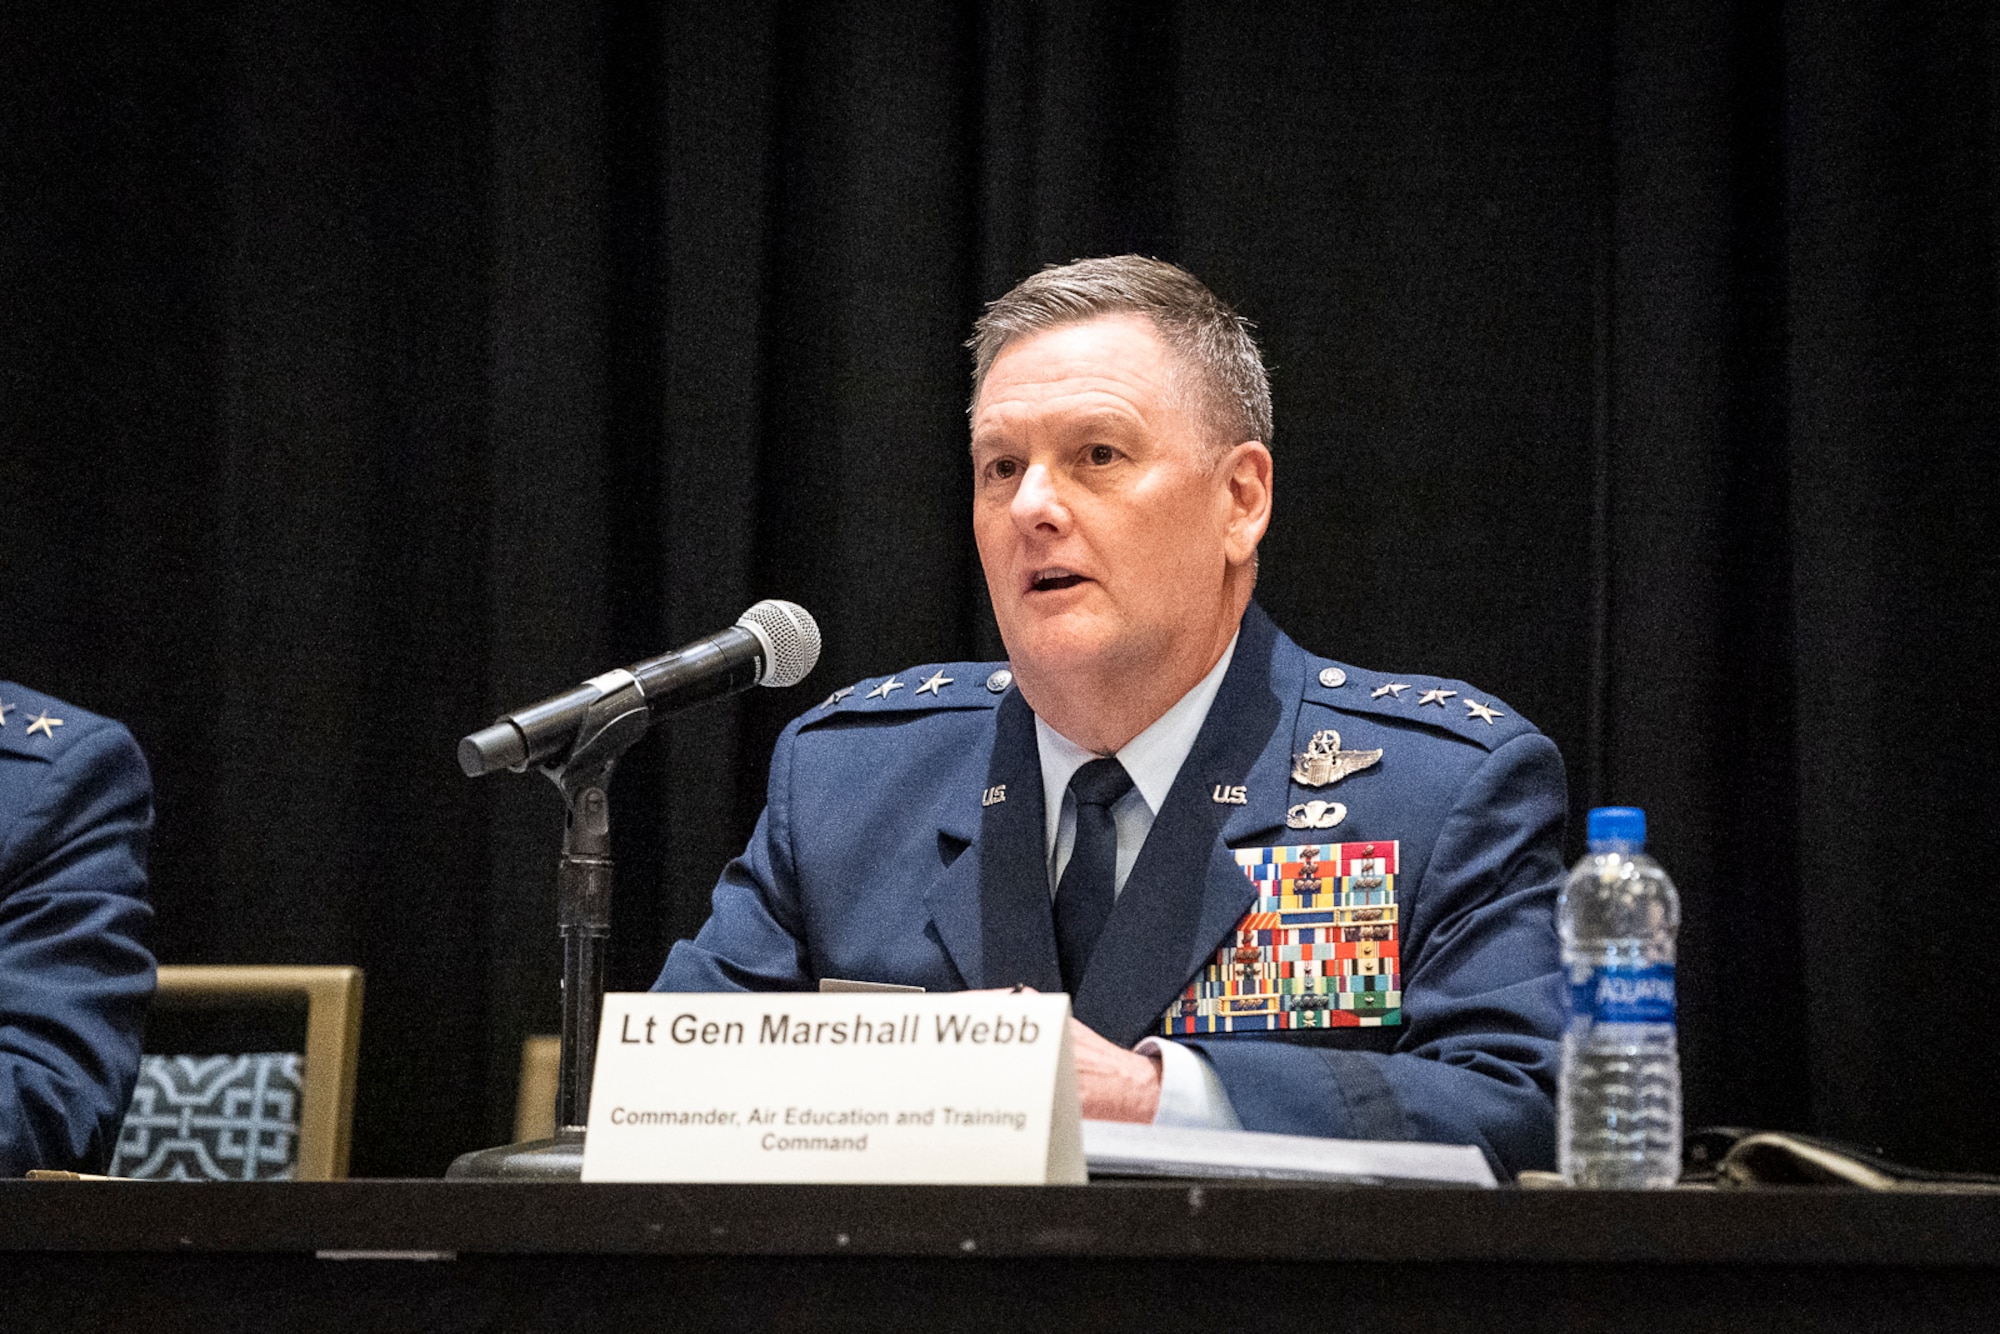 Lt. Gen. Brad Webb, Air Education and Training Command commander participates in the using the competitive edge to train how we fight panel during the Air Force Association Air, Space and Cyber Conference in National Harbor, Md., Sept. 18, 2019. The ASC Conference is a professional development seminar that offers the opportunity for Department of Defense personnel to participate in forums, speeches and workshops. (U.S. Air Force photo by Tech. Sgt. D. Myles Cullen)